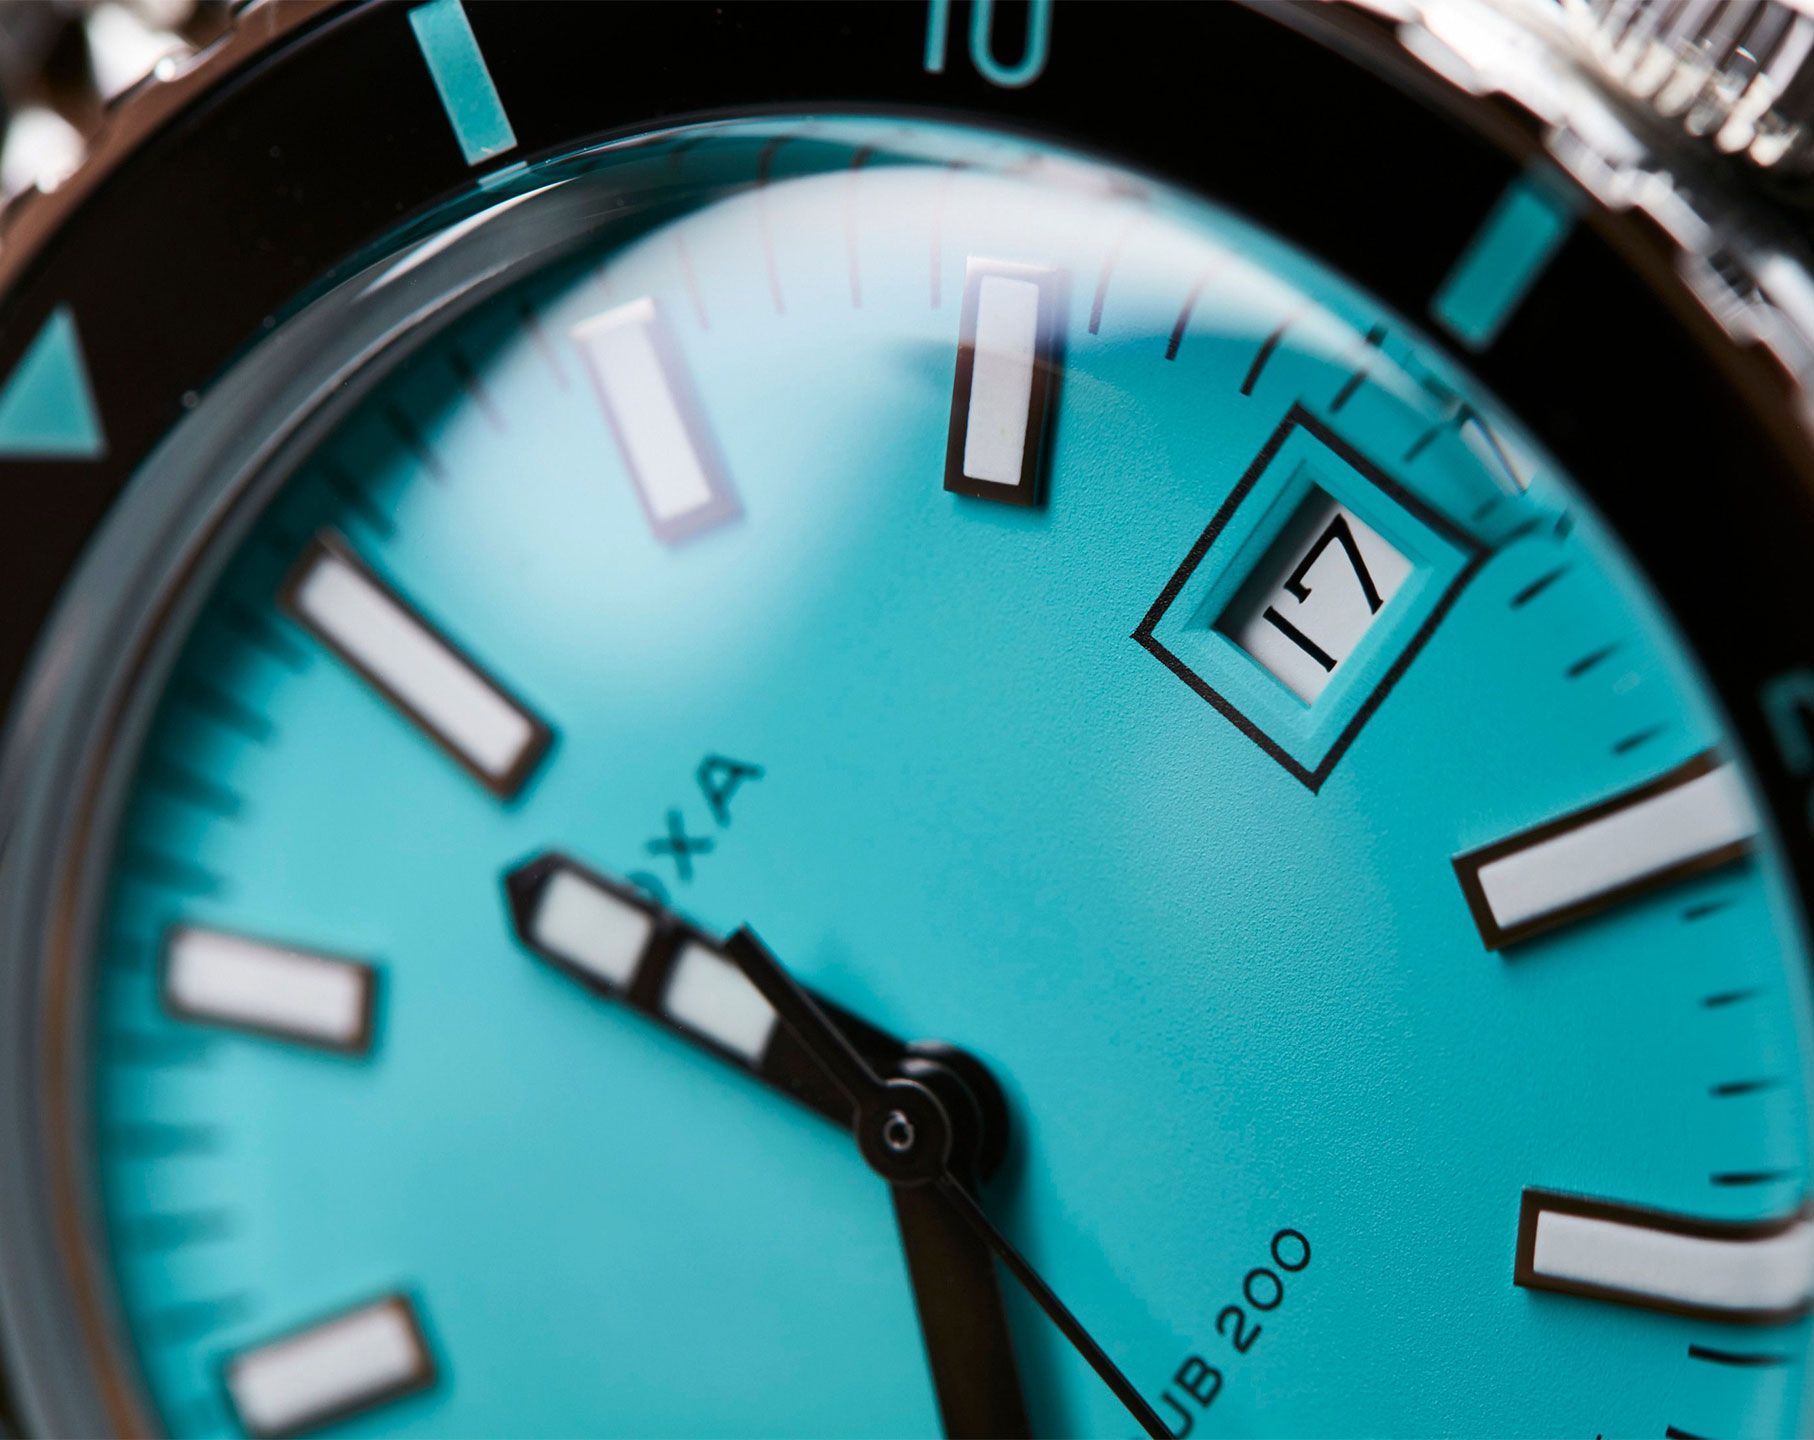 Doxa Aquamarine 42 mm Watch in Turquoise Dial For Men - 6